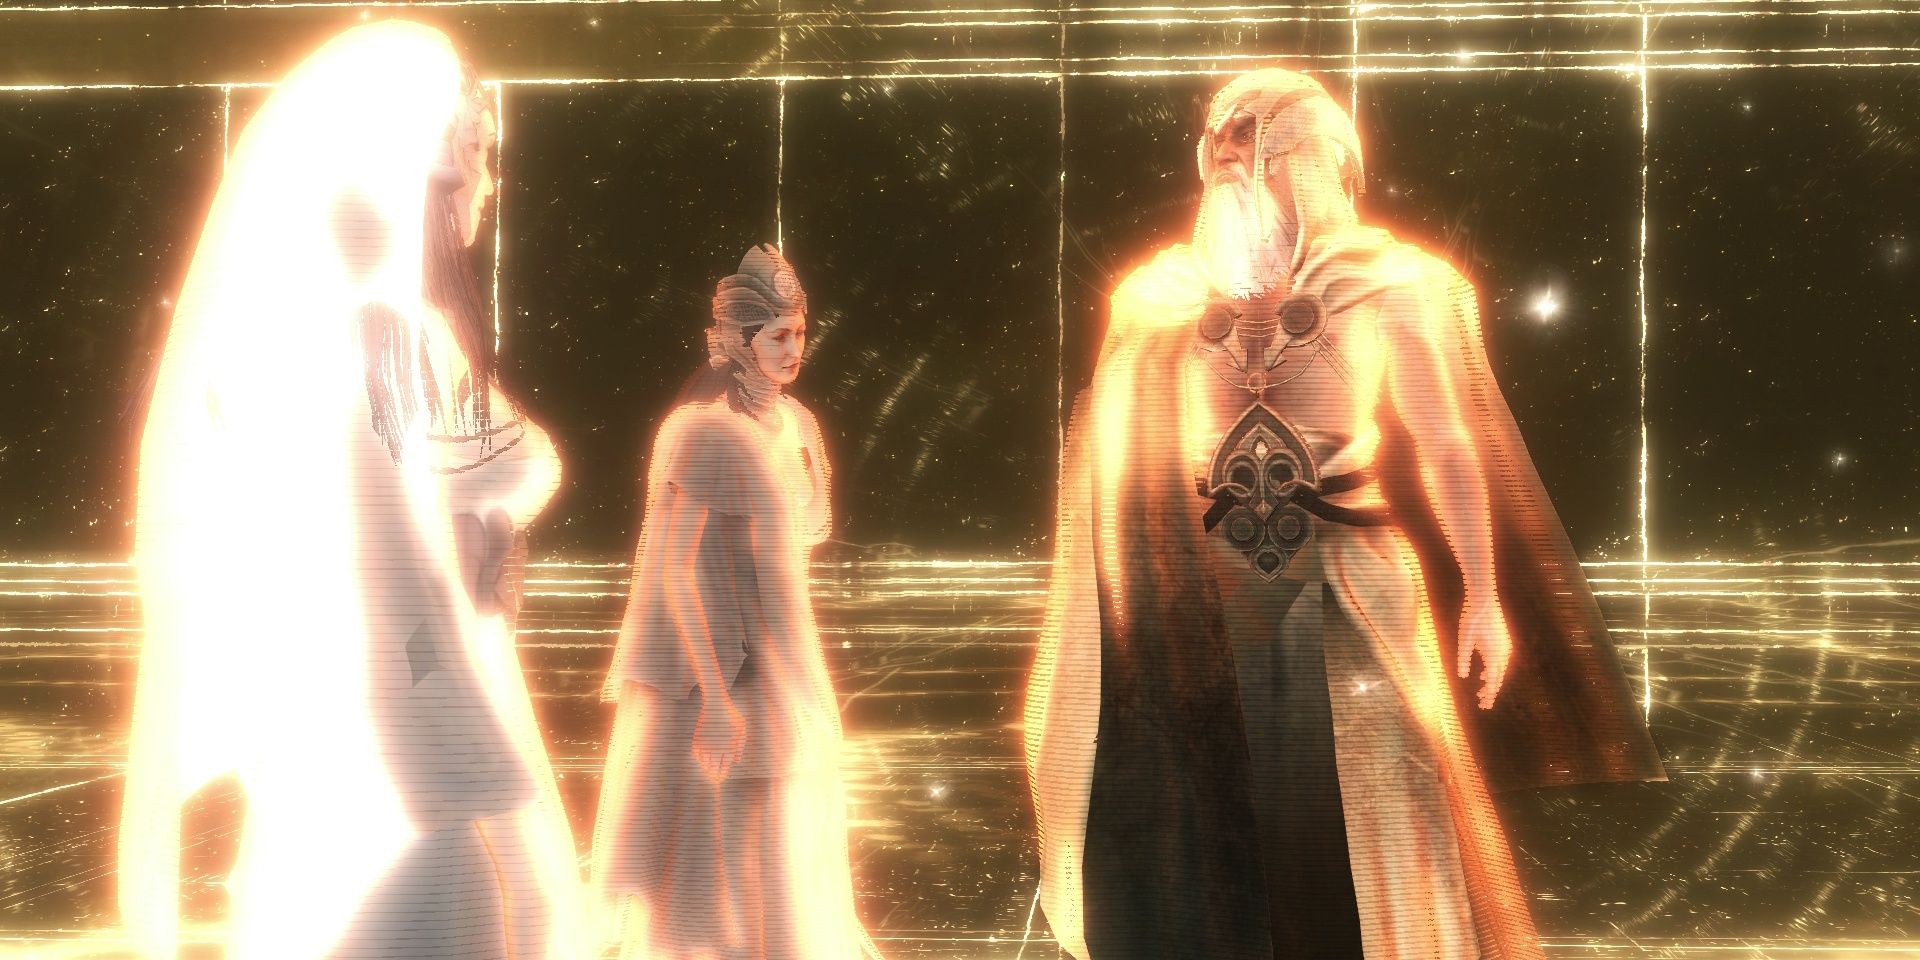 A cut scene in Assassin's Creed featuring Isu holograms conversing in a golden light-filled area.